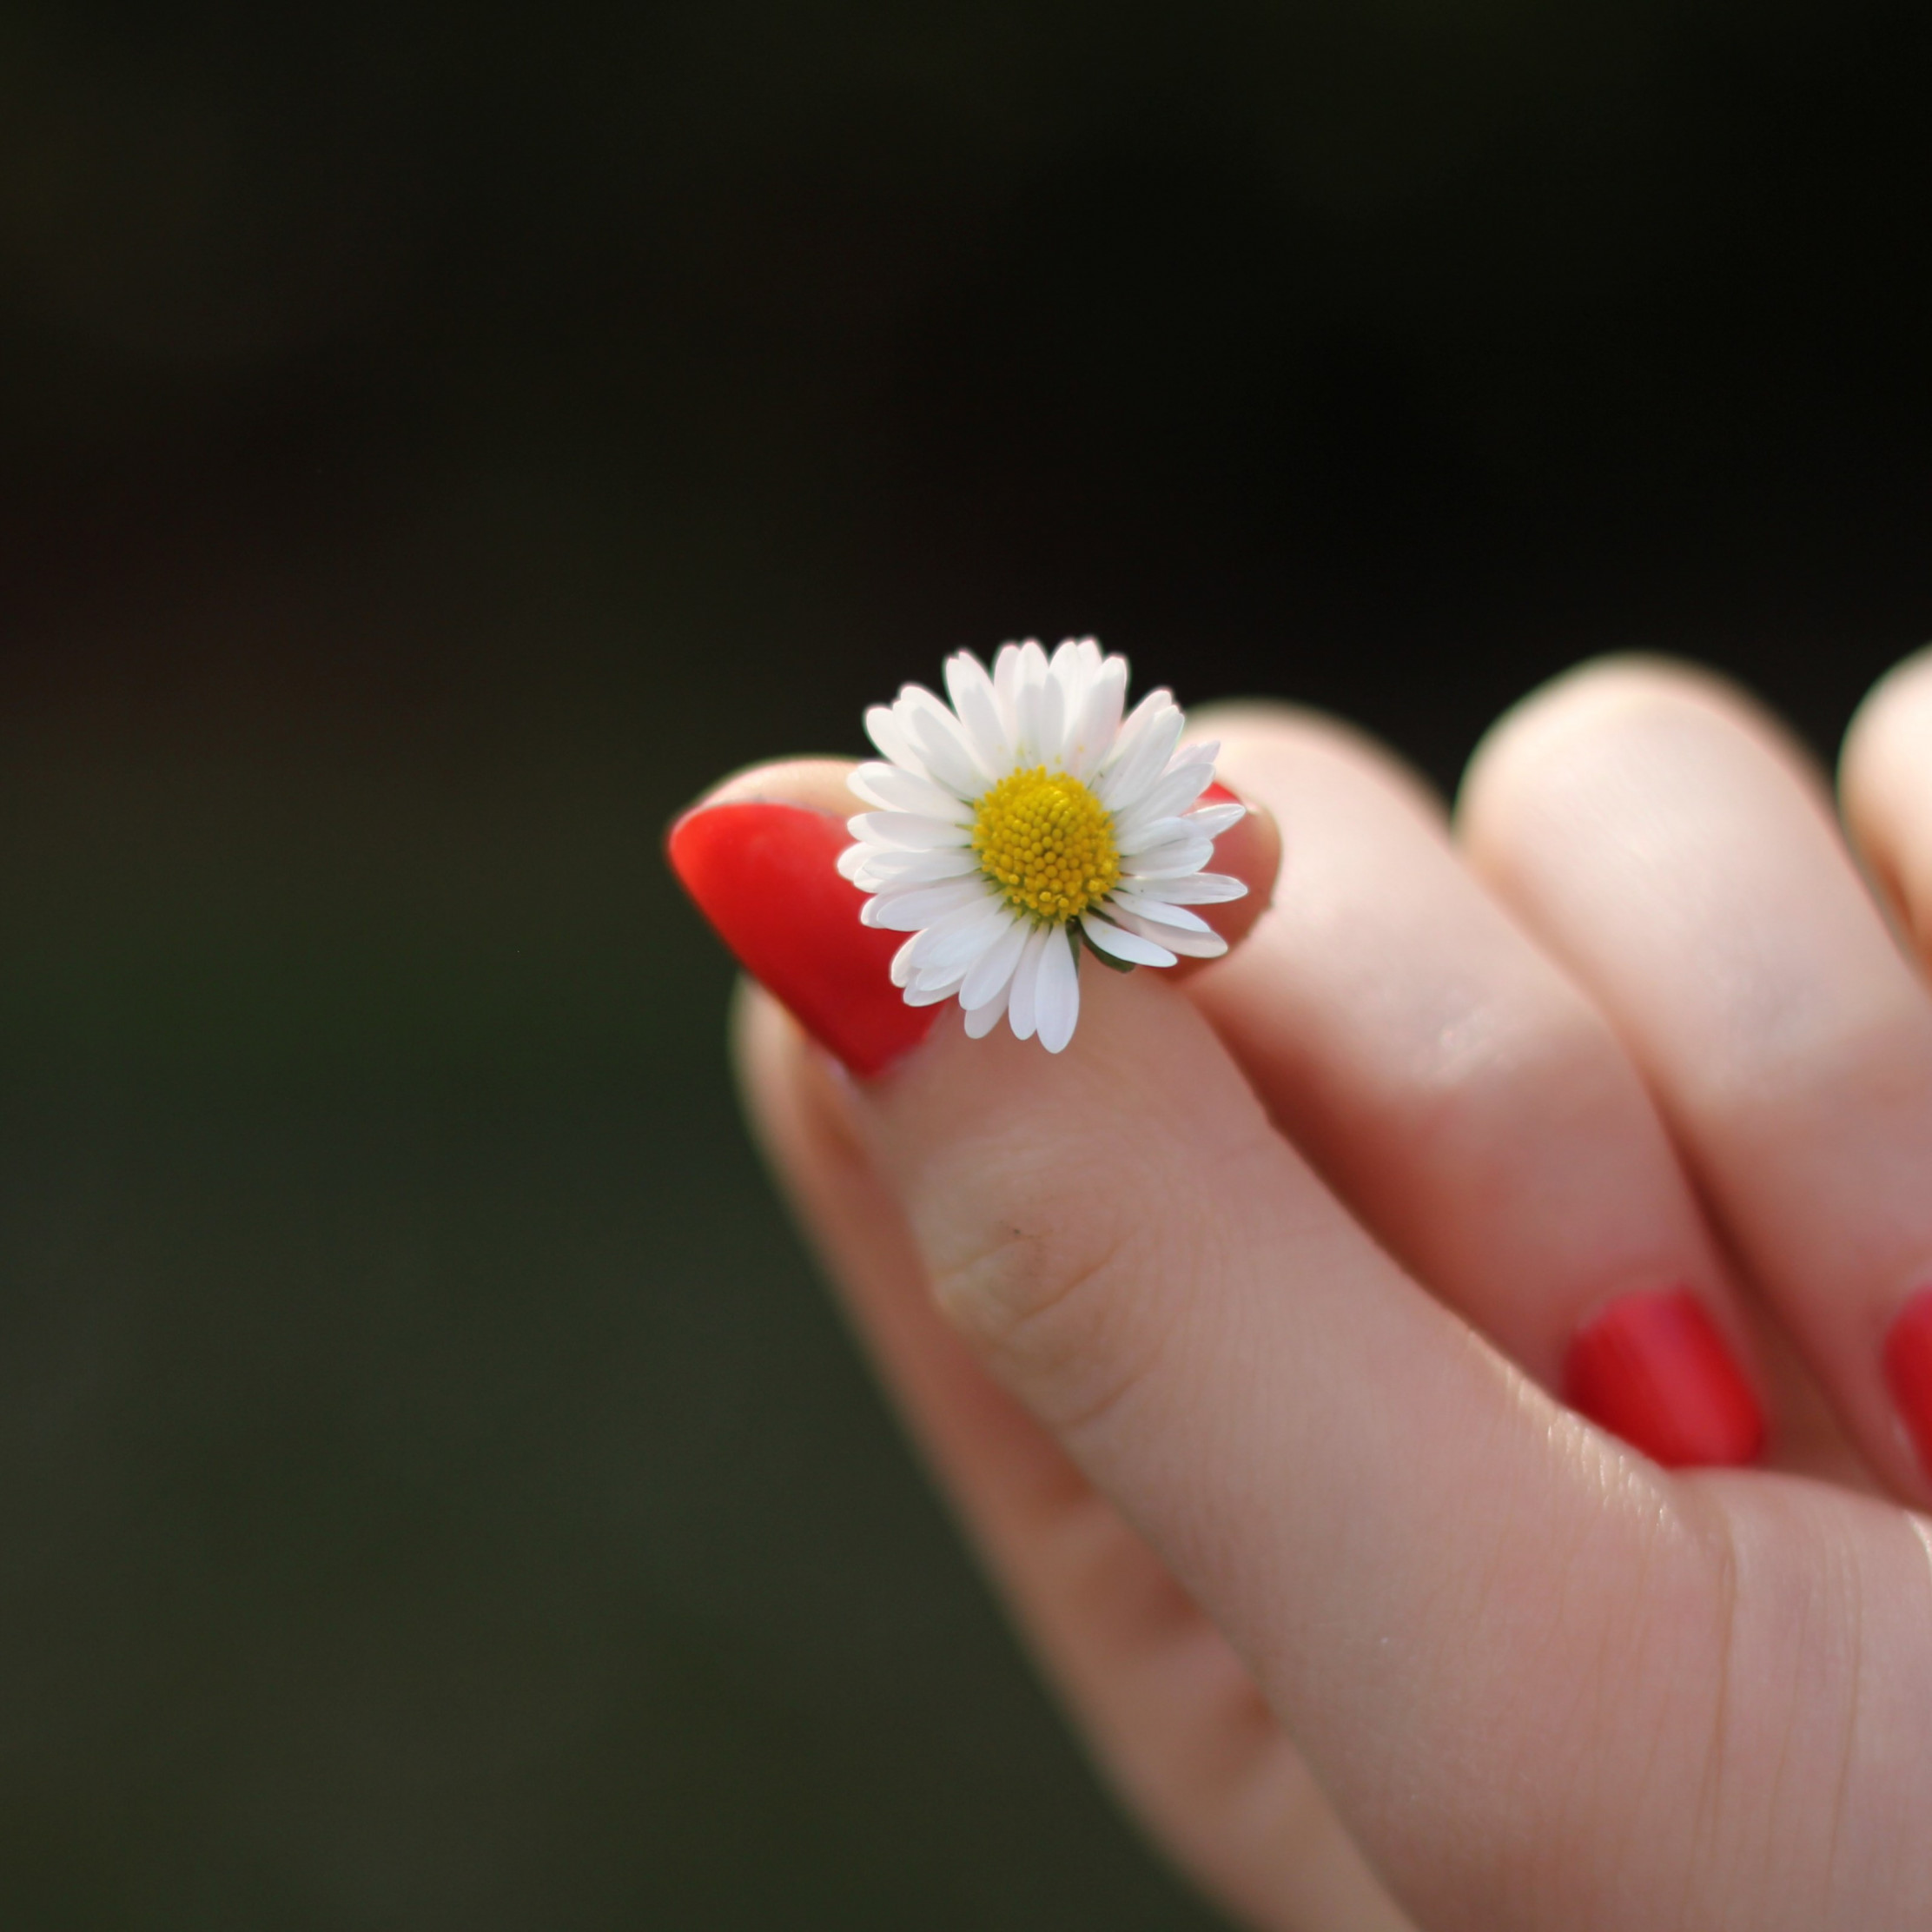 Girl with red nails and a daisy flower wallpaper 2224x2224